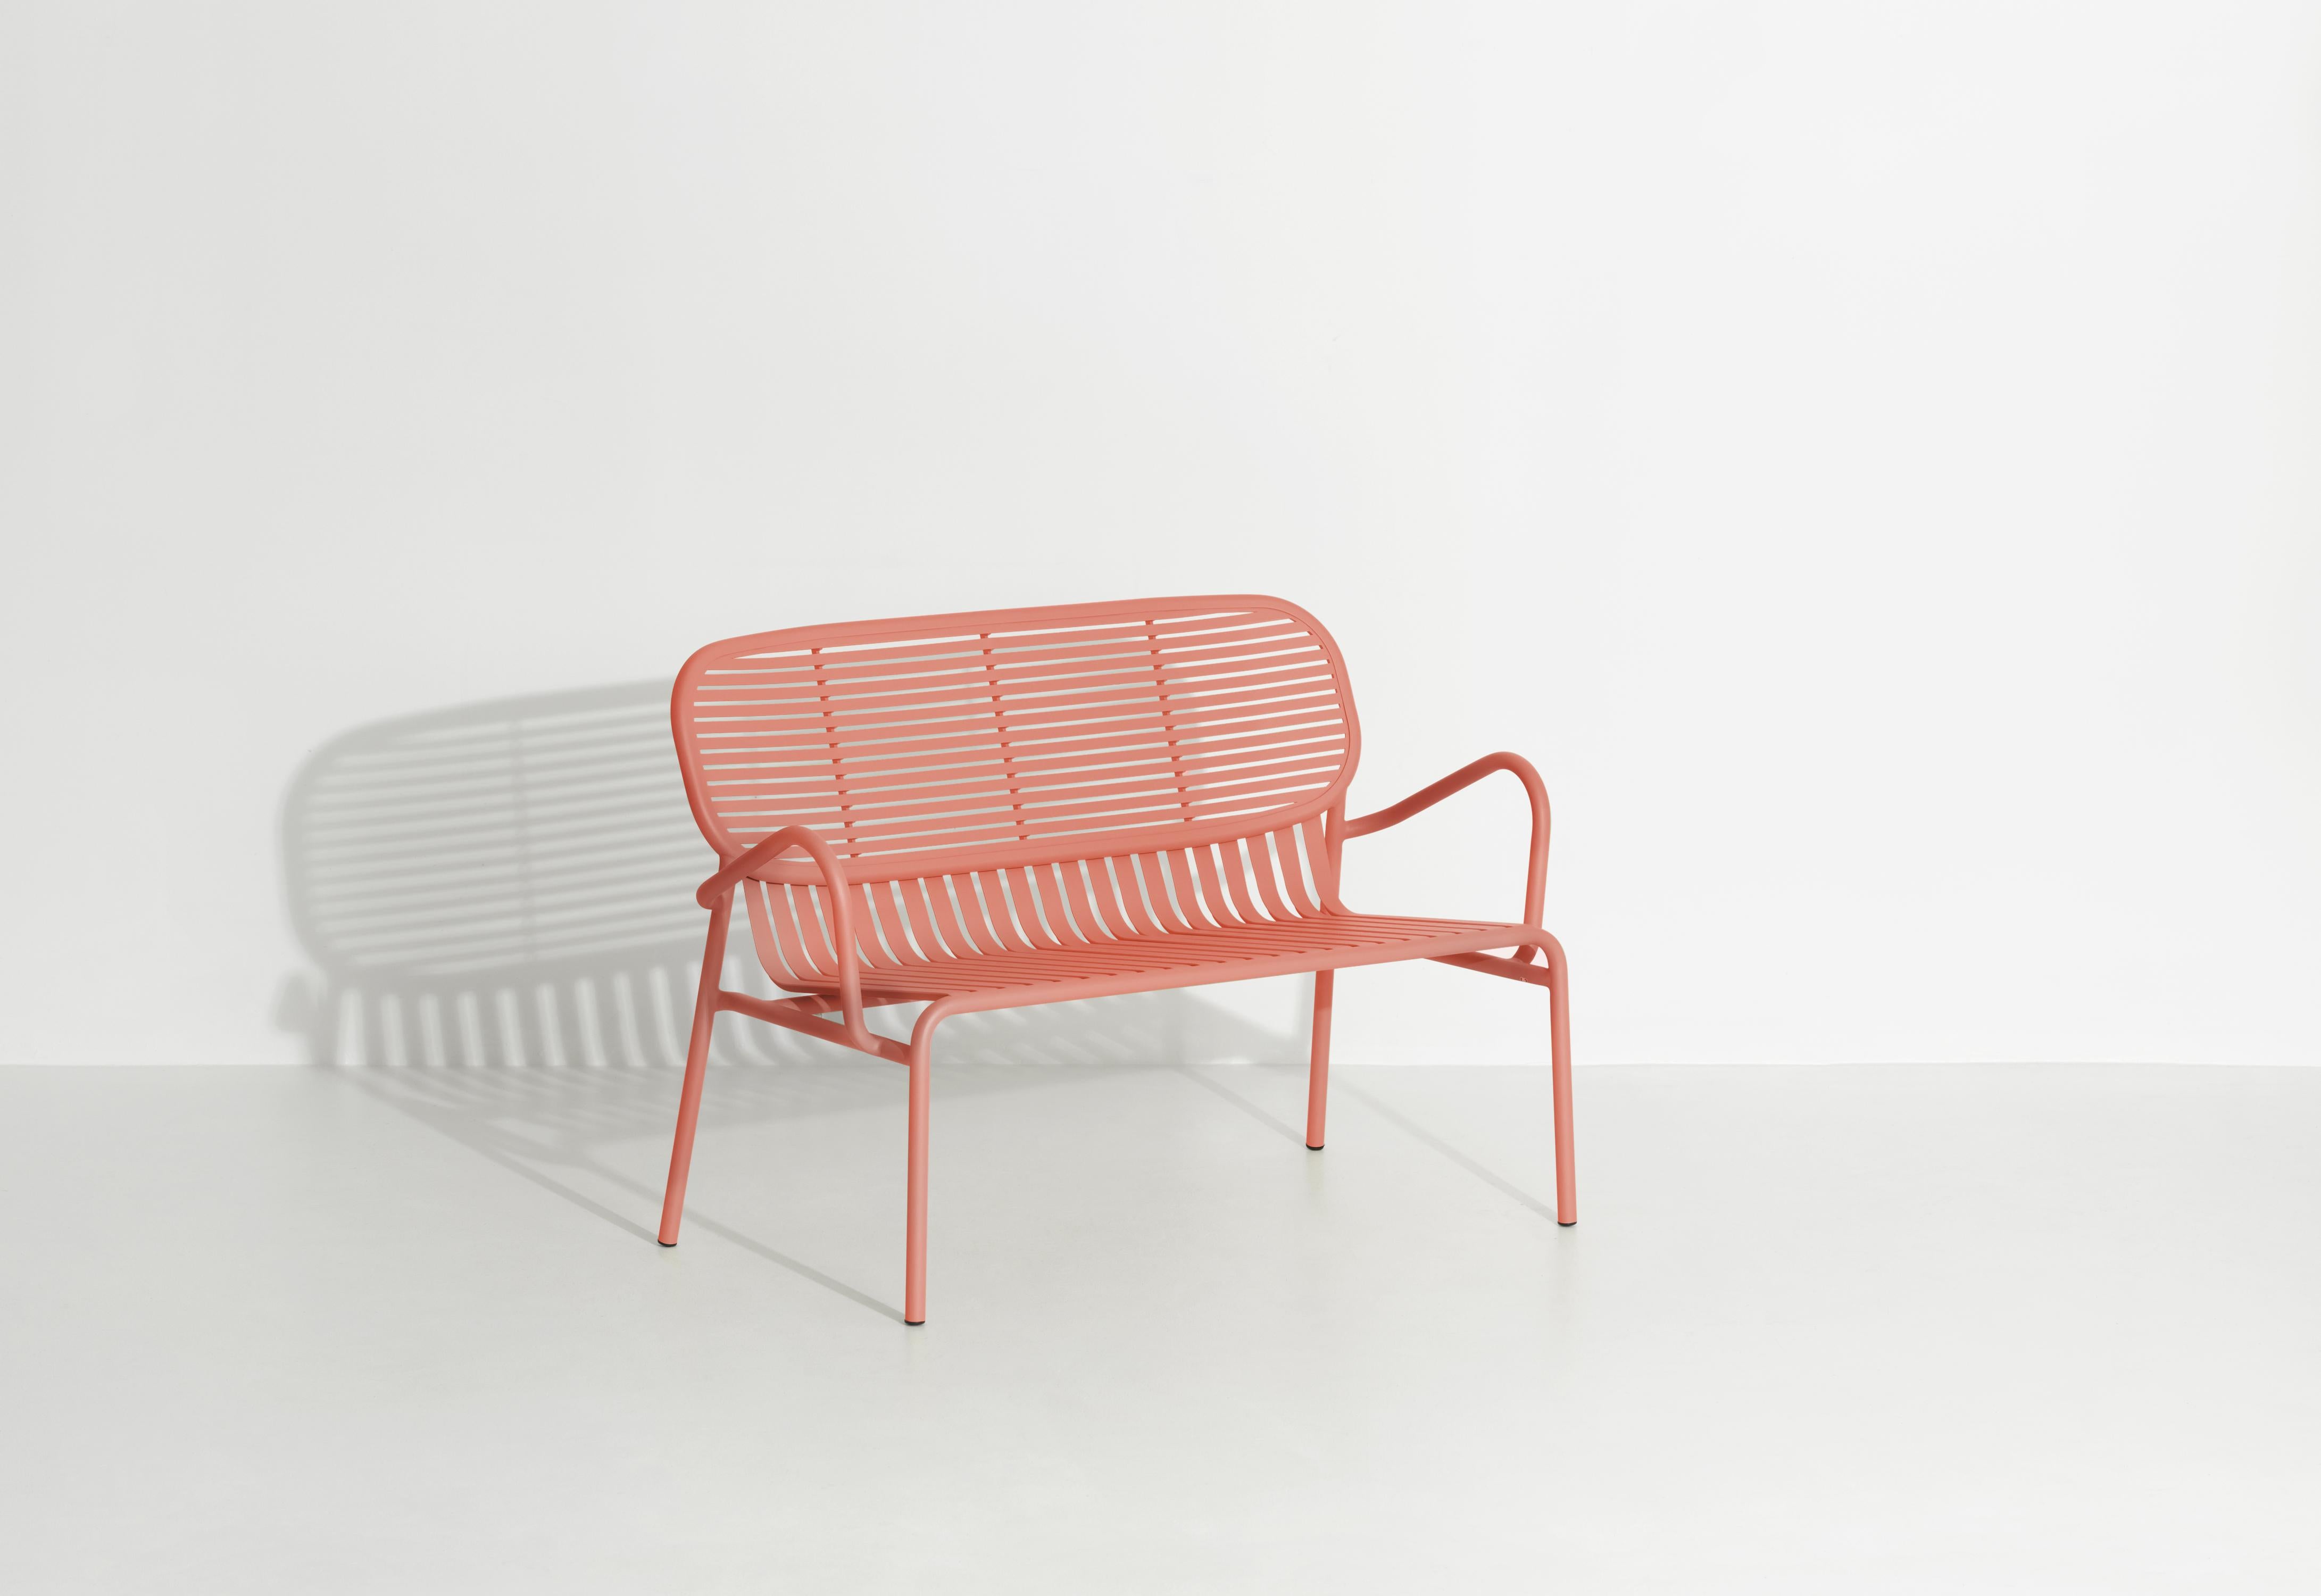 Petite Friture Week-End Sofa in Coral Aluminium by Studio BrichetZiegler, 2017

The week-end collection is a full range of outdoor furniture, in aluminium grained epoxy paint, matt finish, that includes 18 functions and 8 colours for the retail